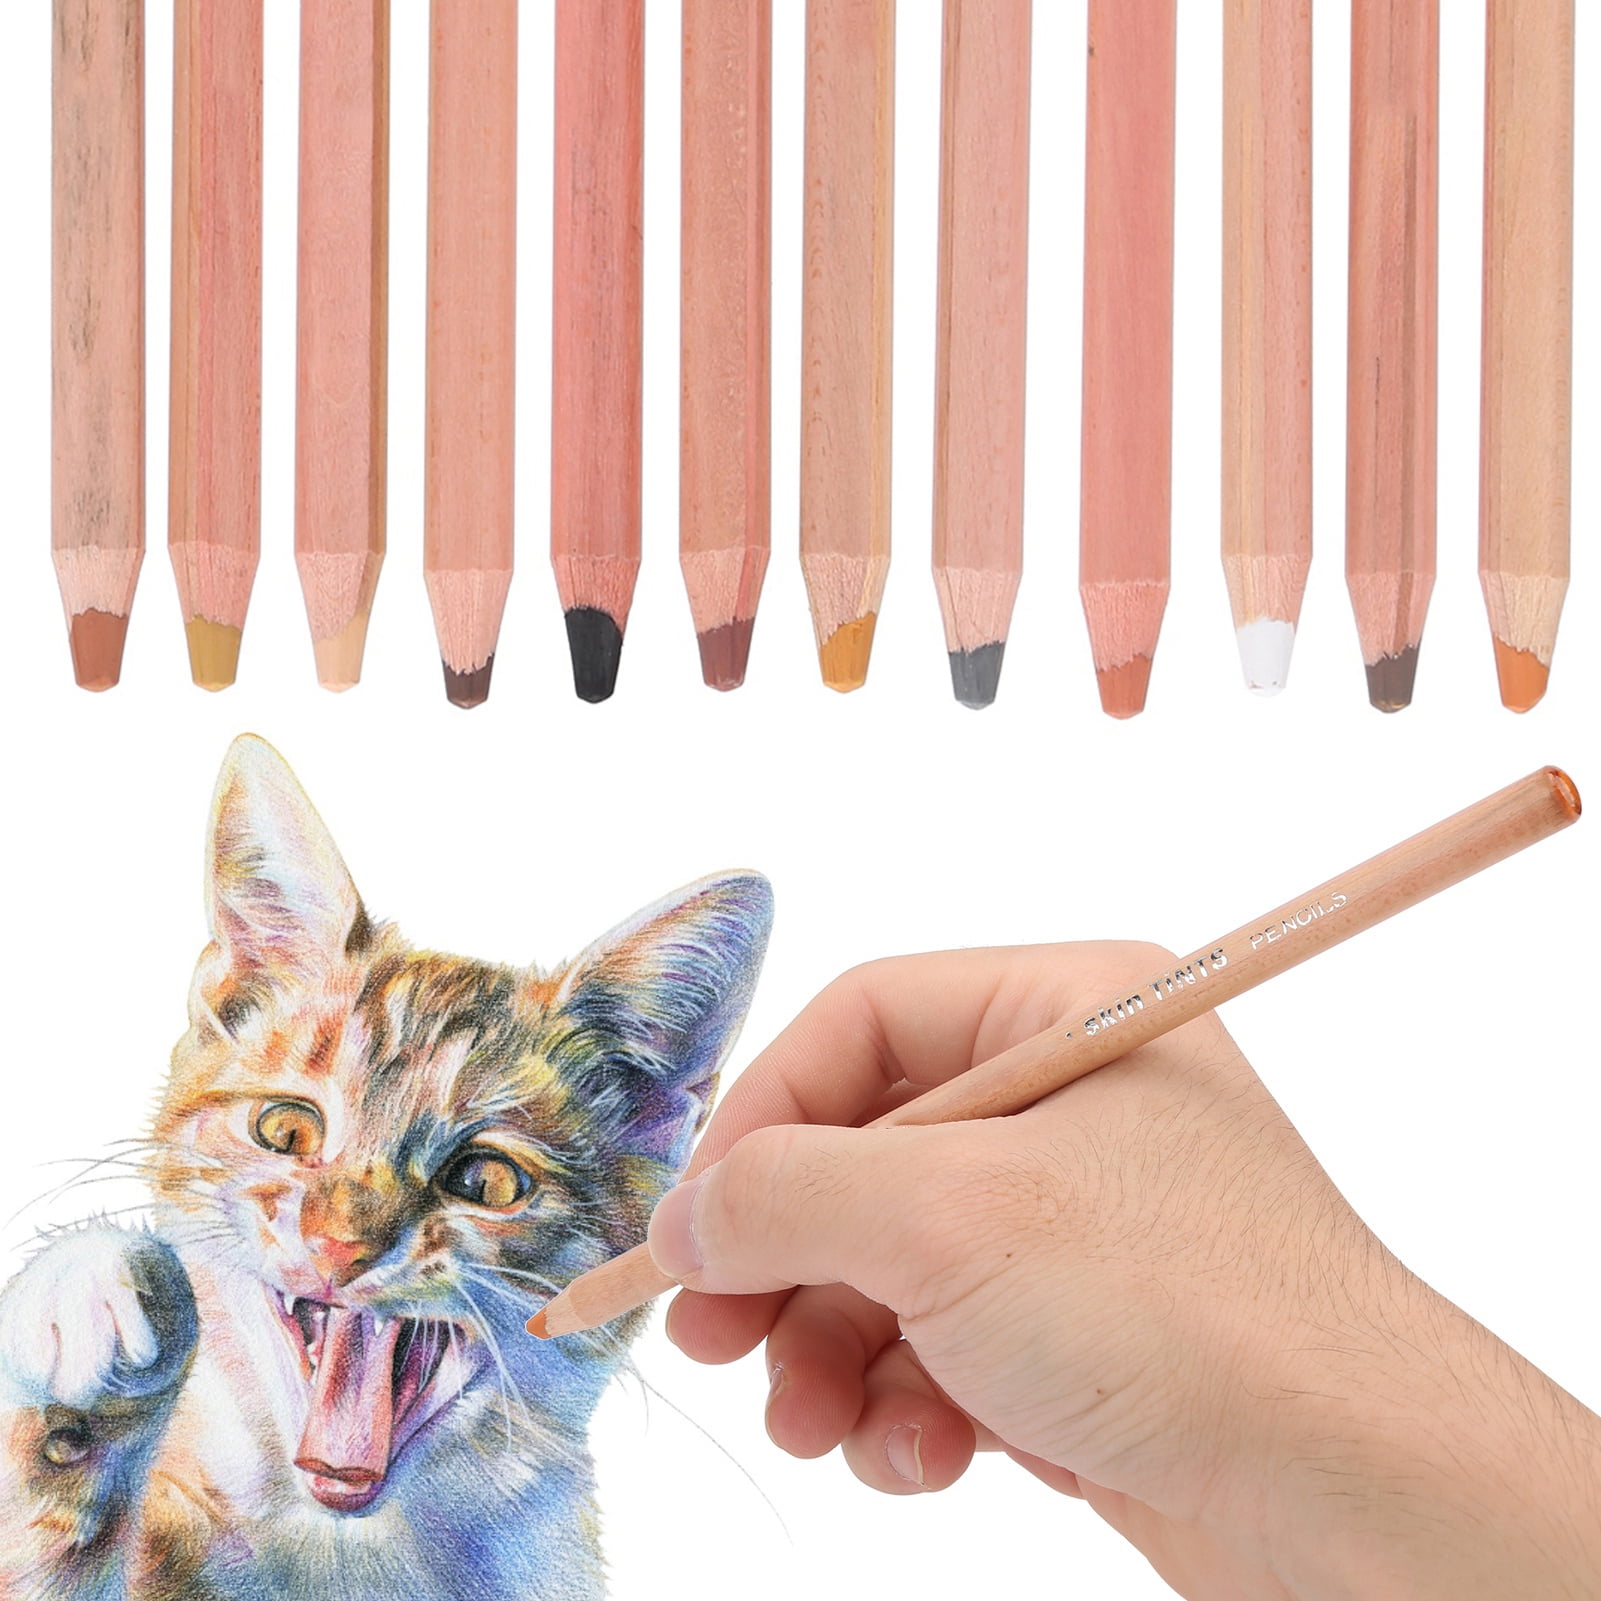  PANDAFLY Professional Colored Charcoal Pencils Drawing Set,  Skin Tone Colored Pencils, Pastel Chalk Pencils for Sketching, Shading,  Coloring, Layering & Blending, 12 Colors : Arts, Crafts & Sewing